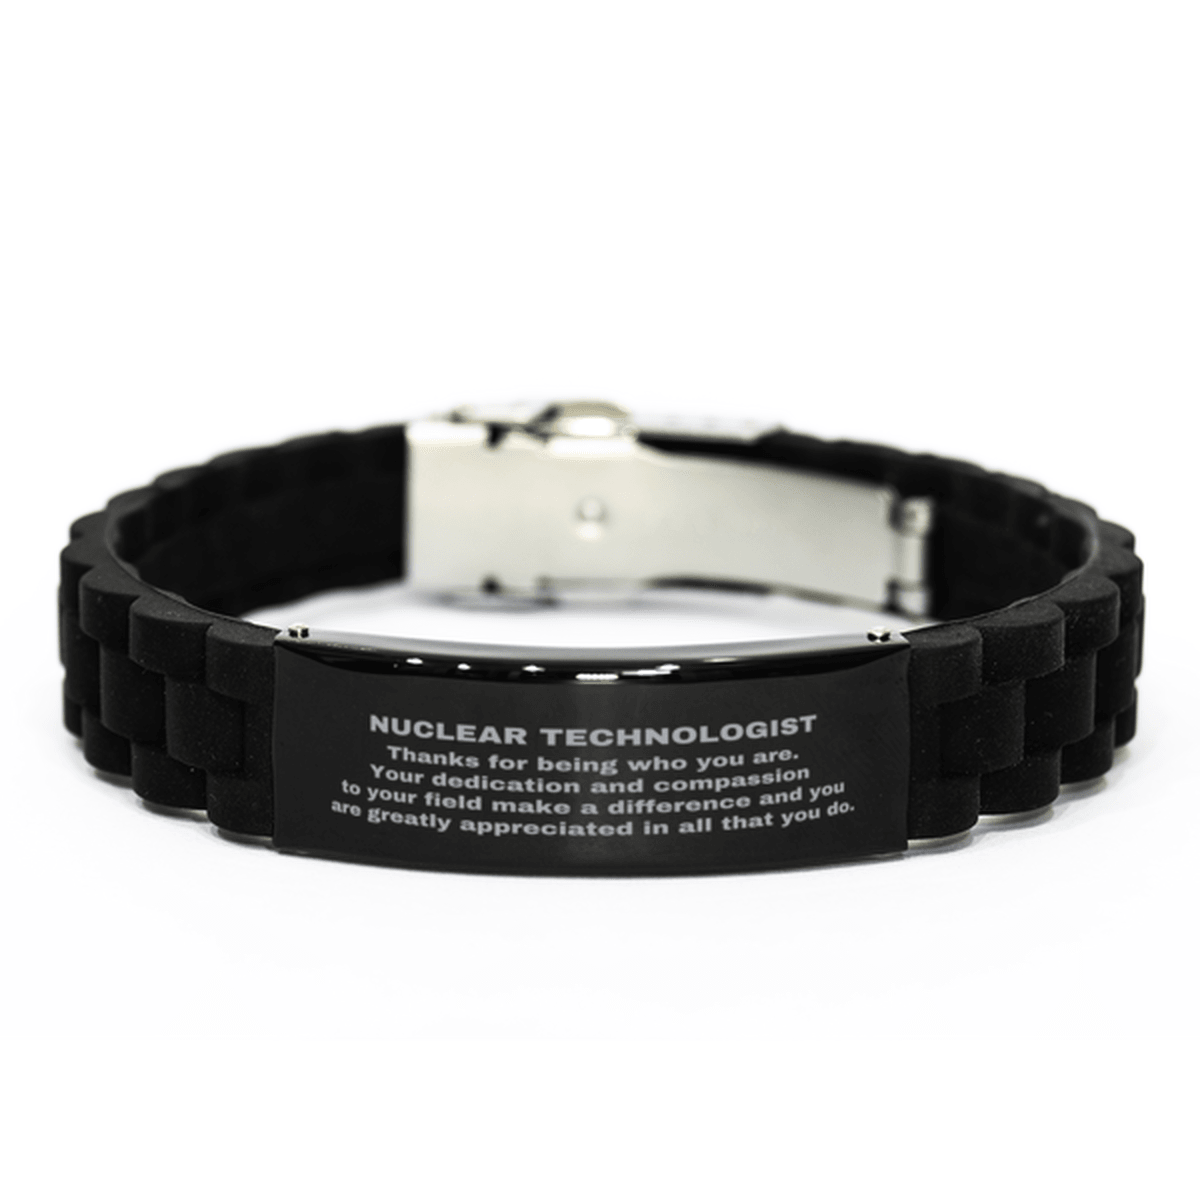 Nuclear Technologist Black Glidelock Clasp Engraved Bracelet - Thanks for being who you are - Birthday Christmas Jewelry Gifts Coworkers Colleague Boss